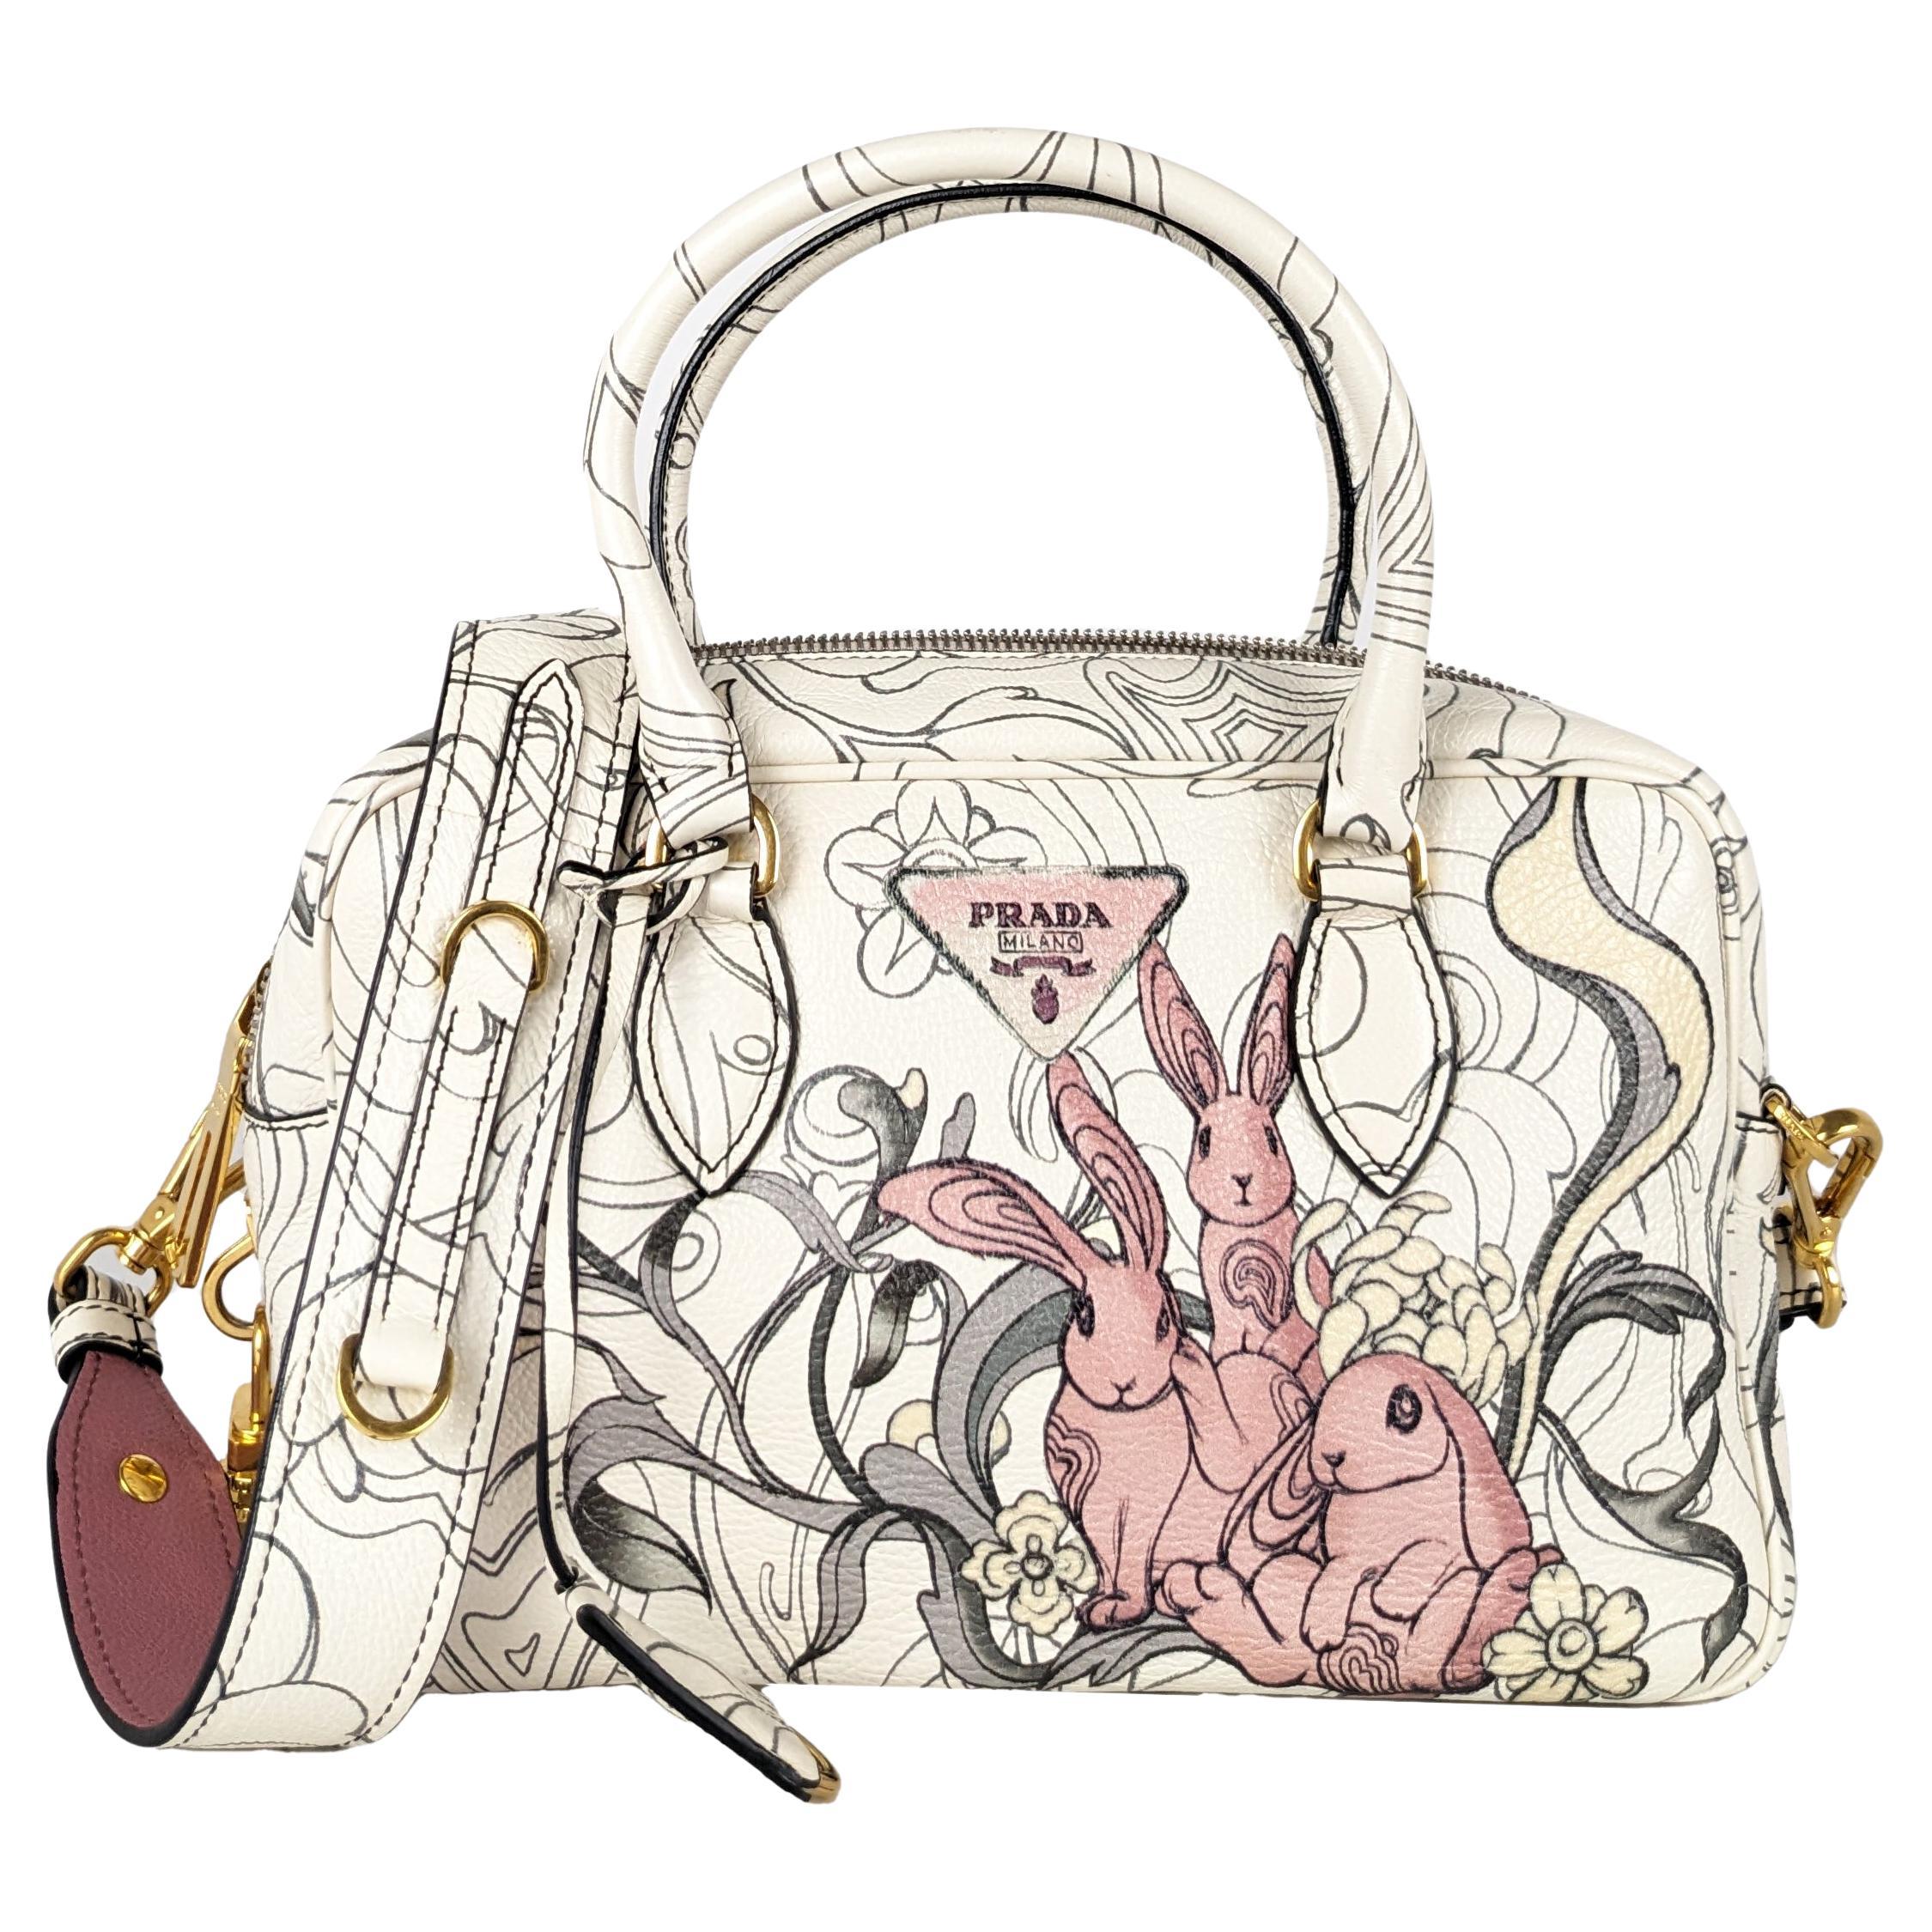 Sold at Auction: Prada Ivory Glace Calfskin Leather Double Zip Crossbody